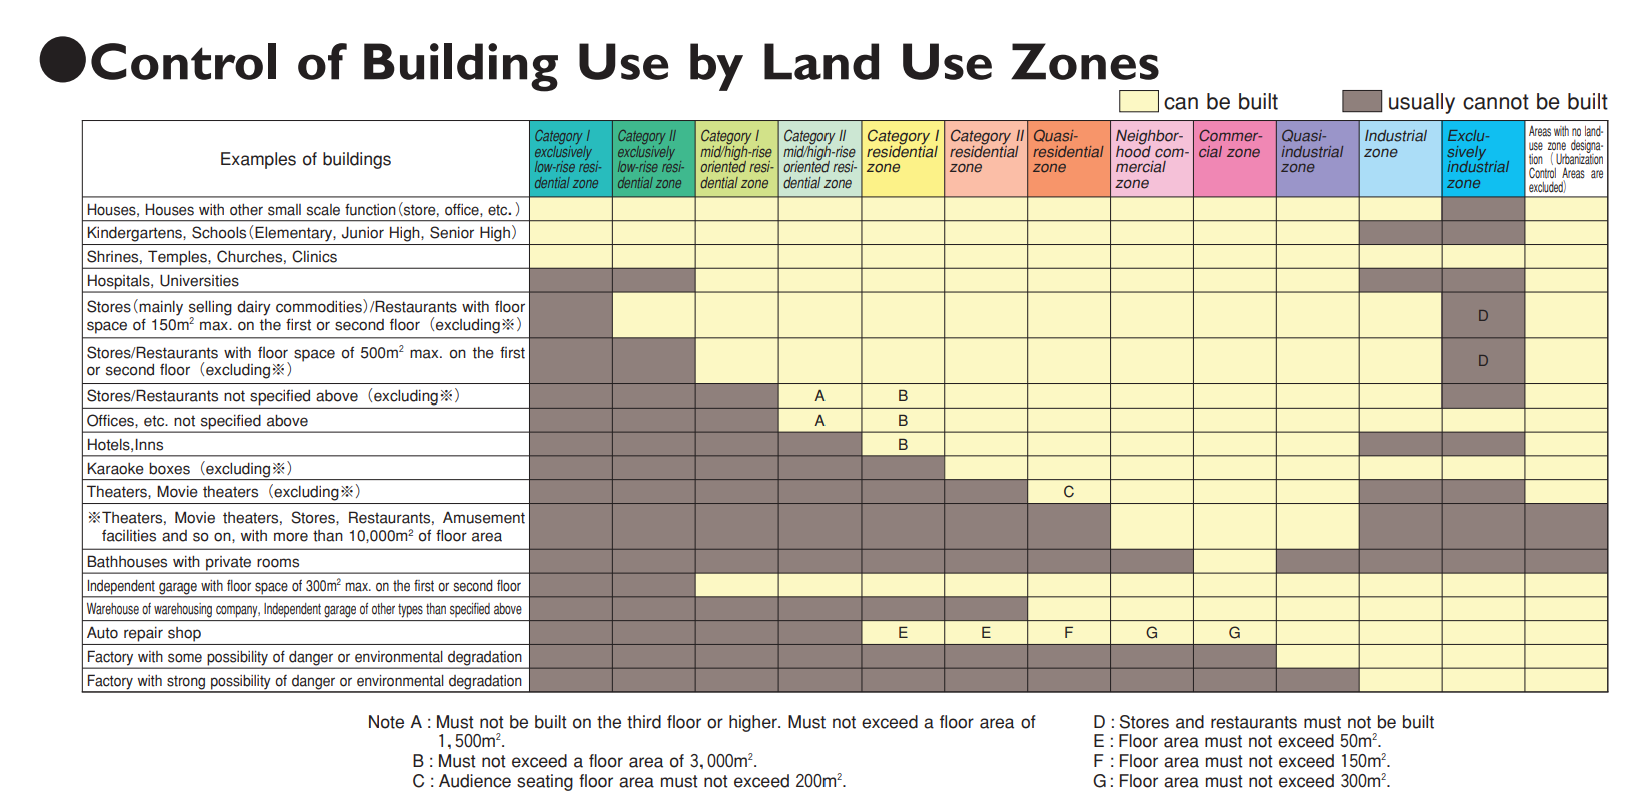 Zoning and land use in Japan